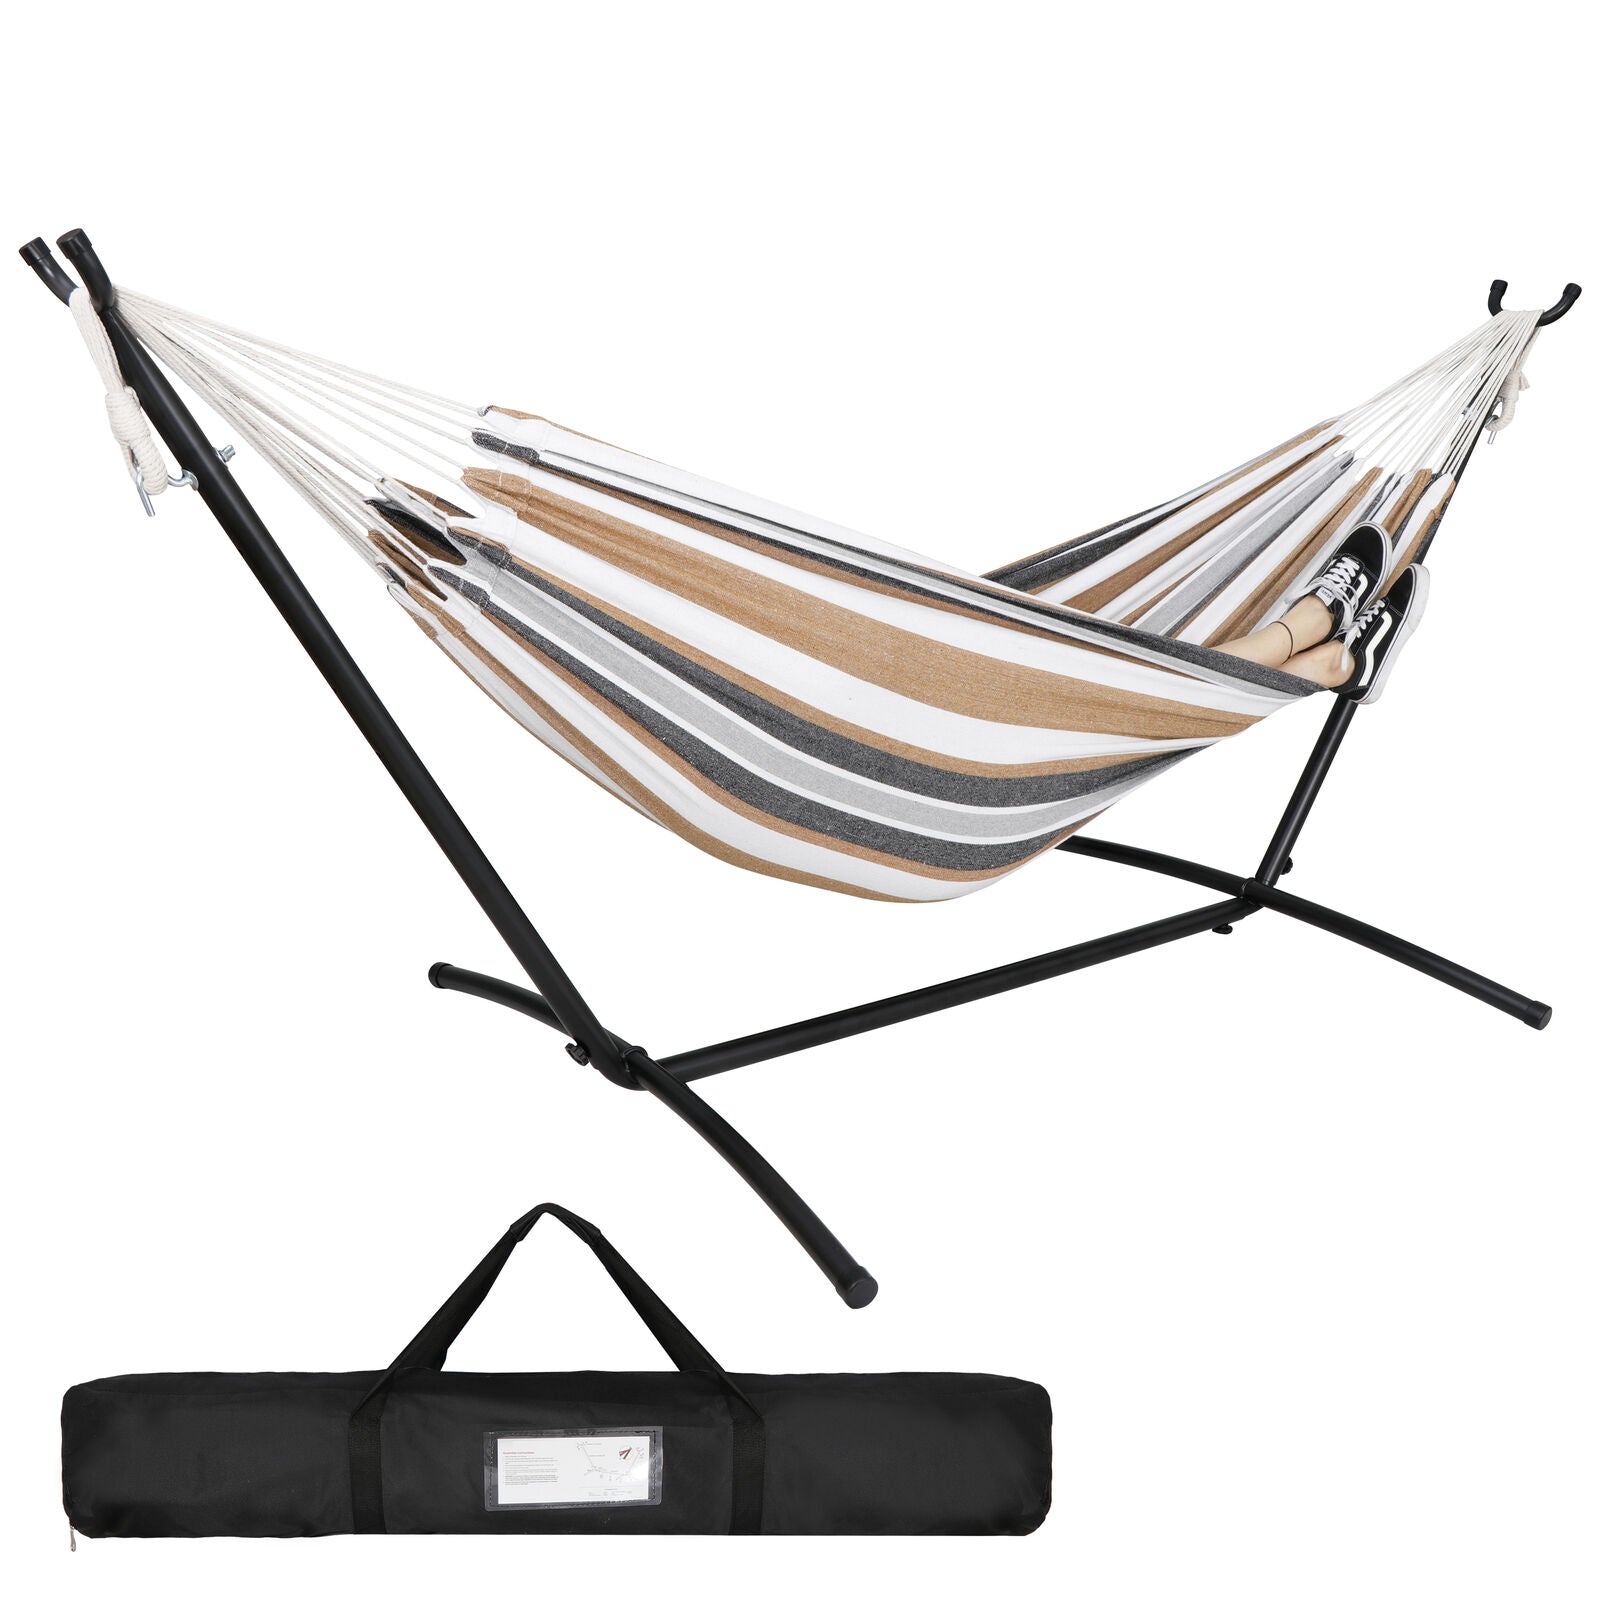 Heavy Duty 9 Foot Double Hammock Steel Stand and Carrying Case, Multi Color, 400 lb Capacity